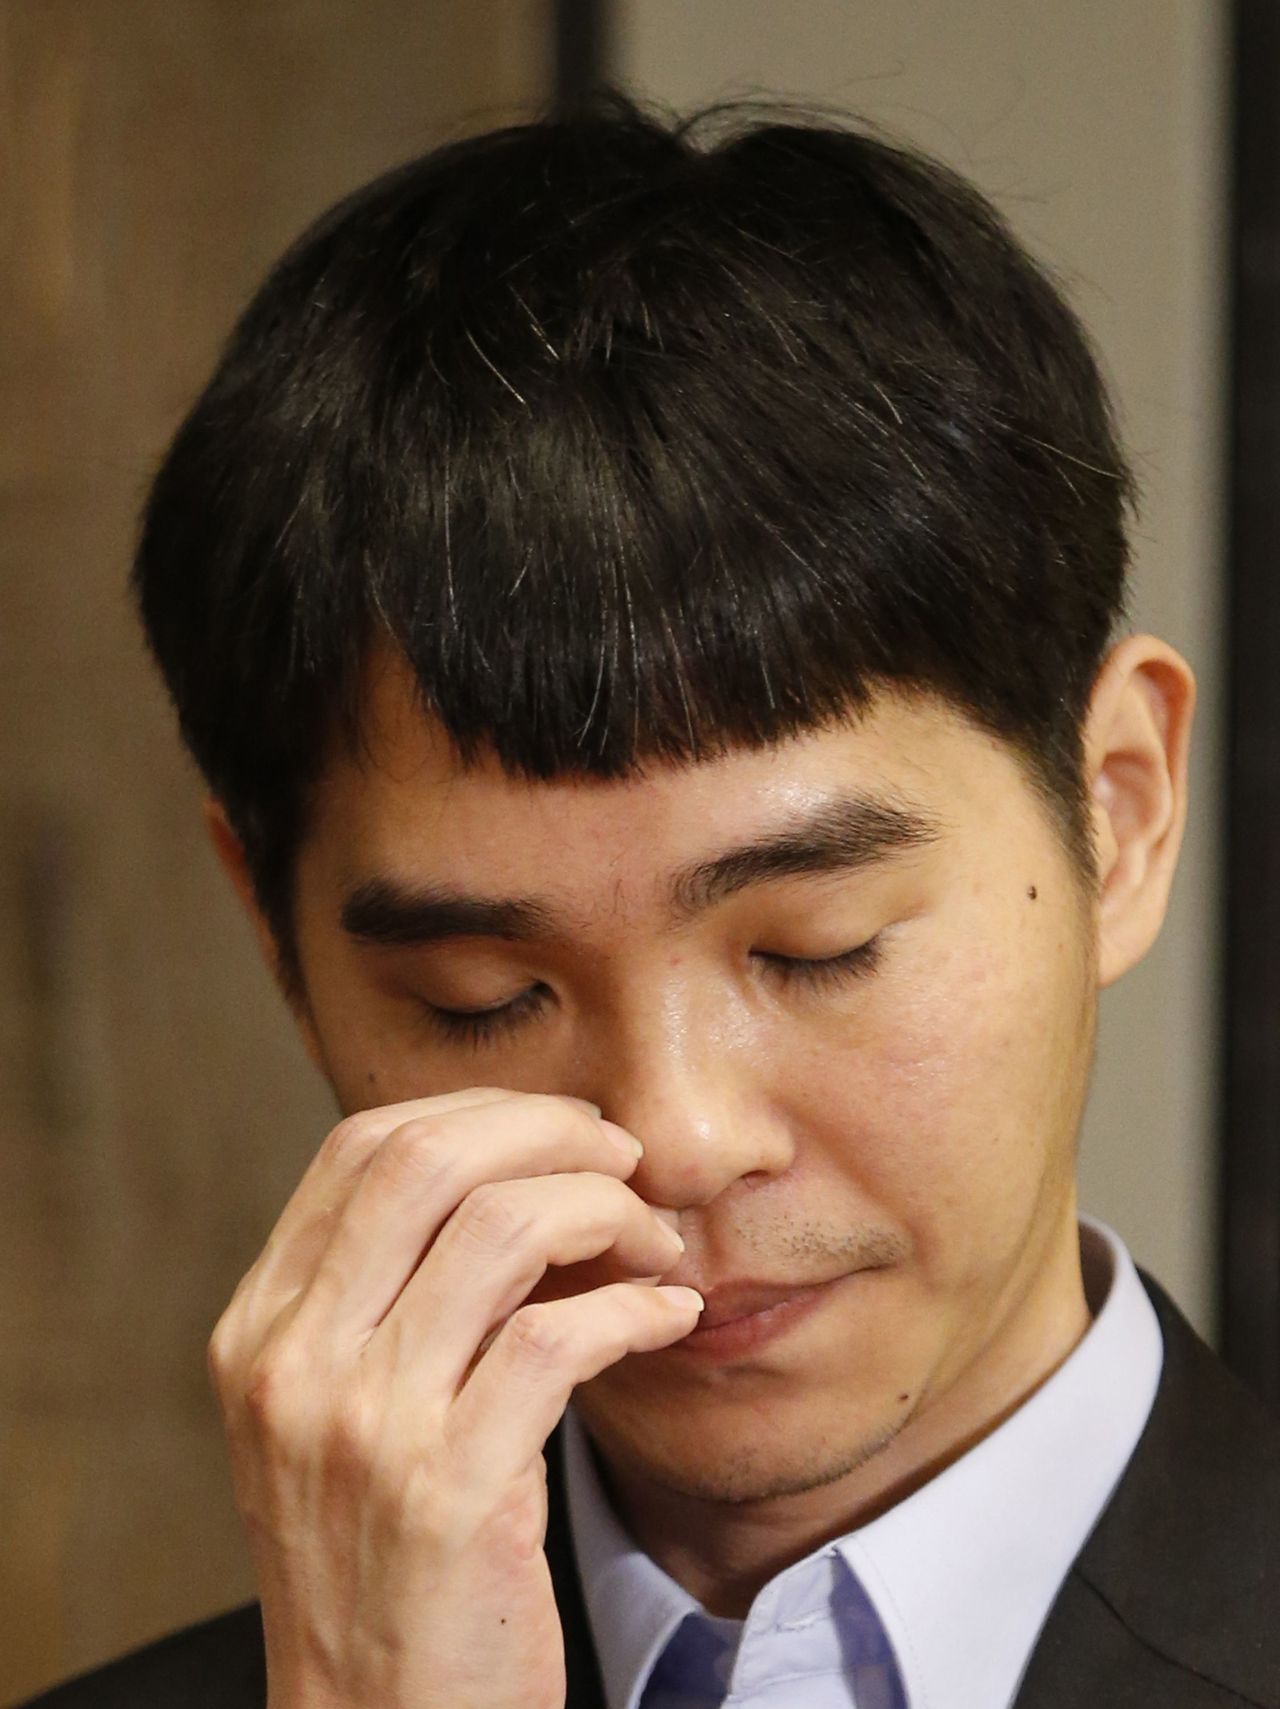 Professional Go player Lee Sedol waits for a press conference Saturday after losing a third match to the Google program AlphaGo in Seoul, South Korea.